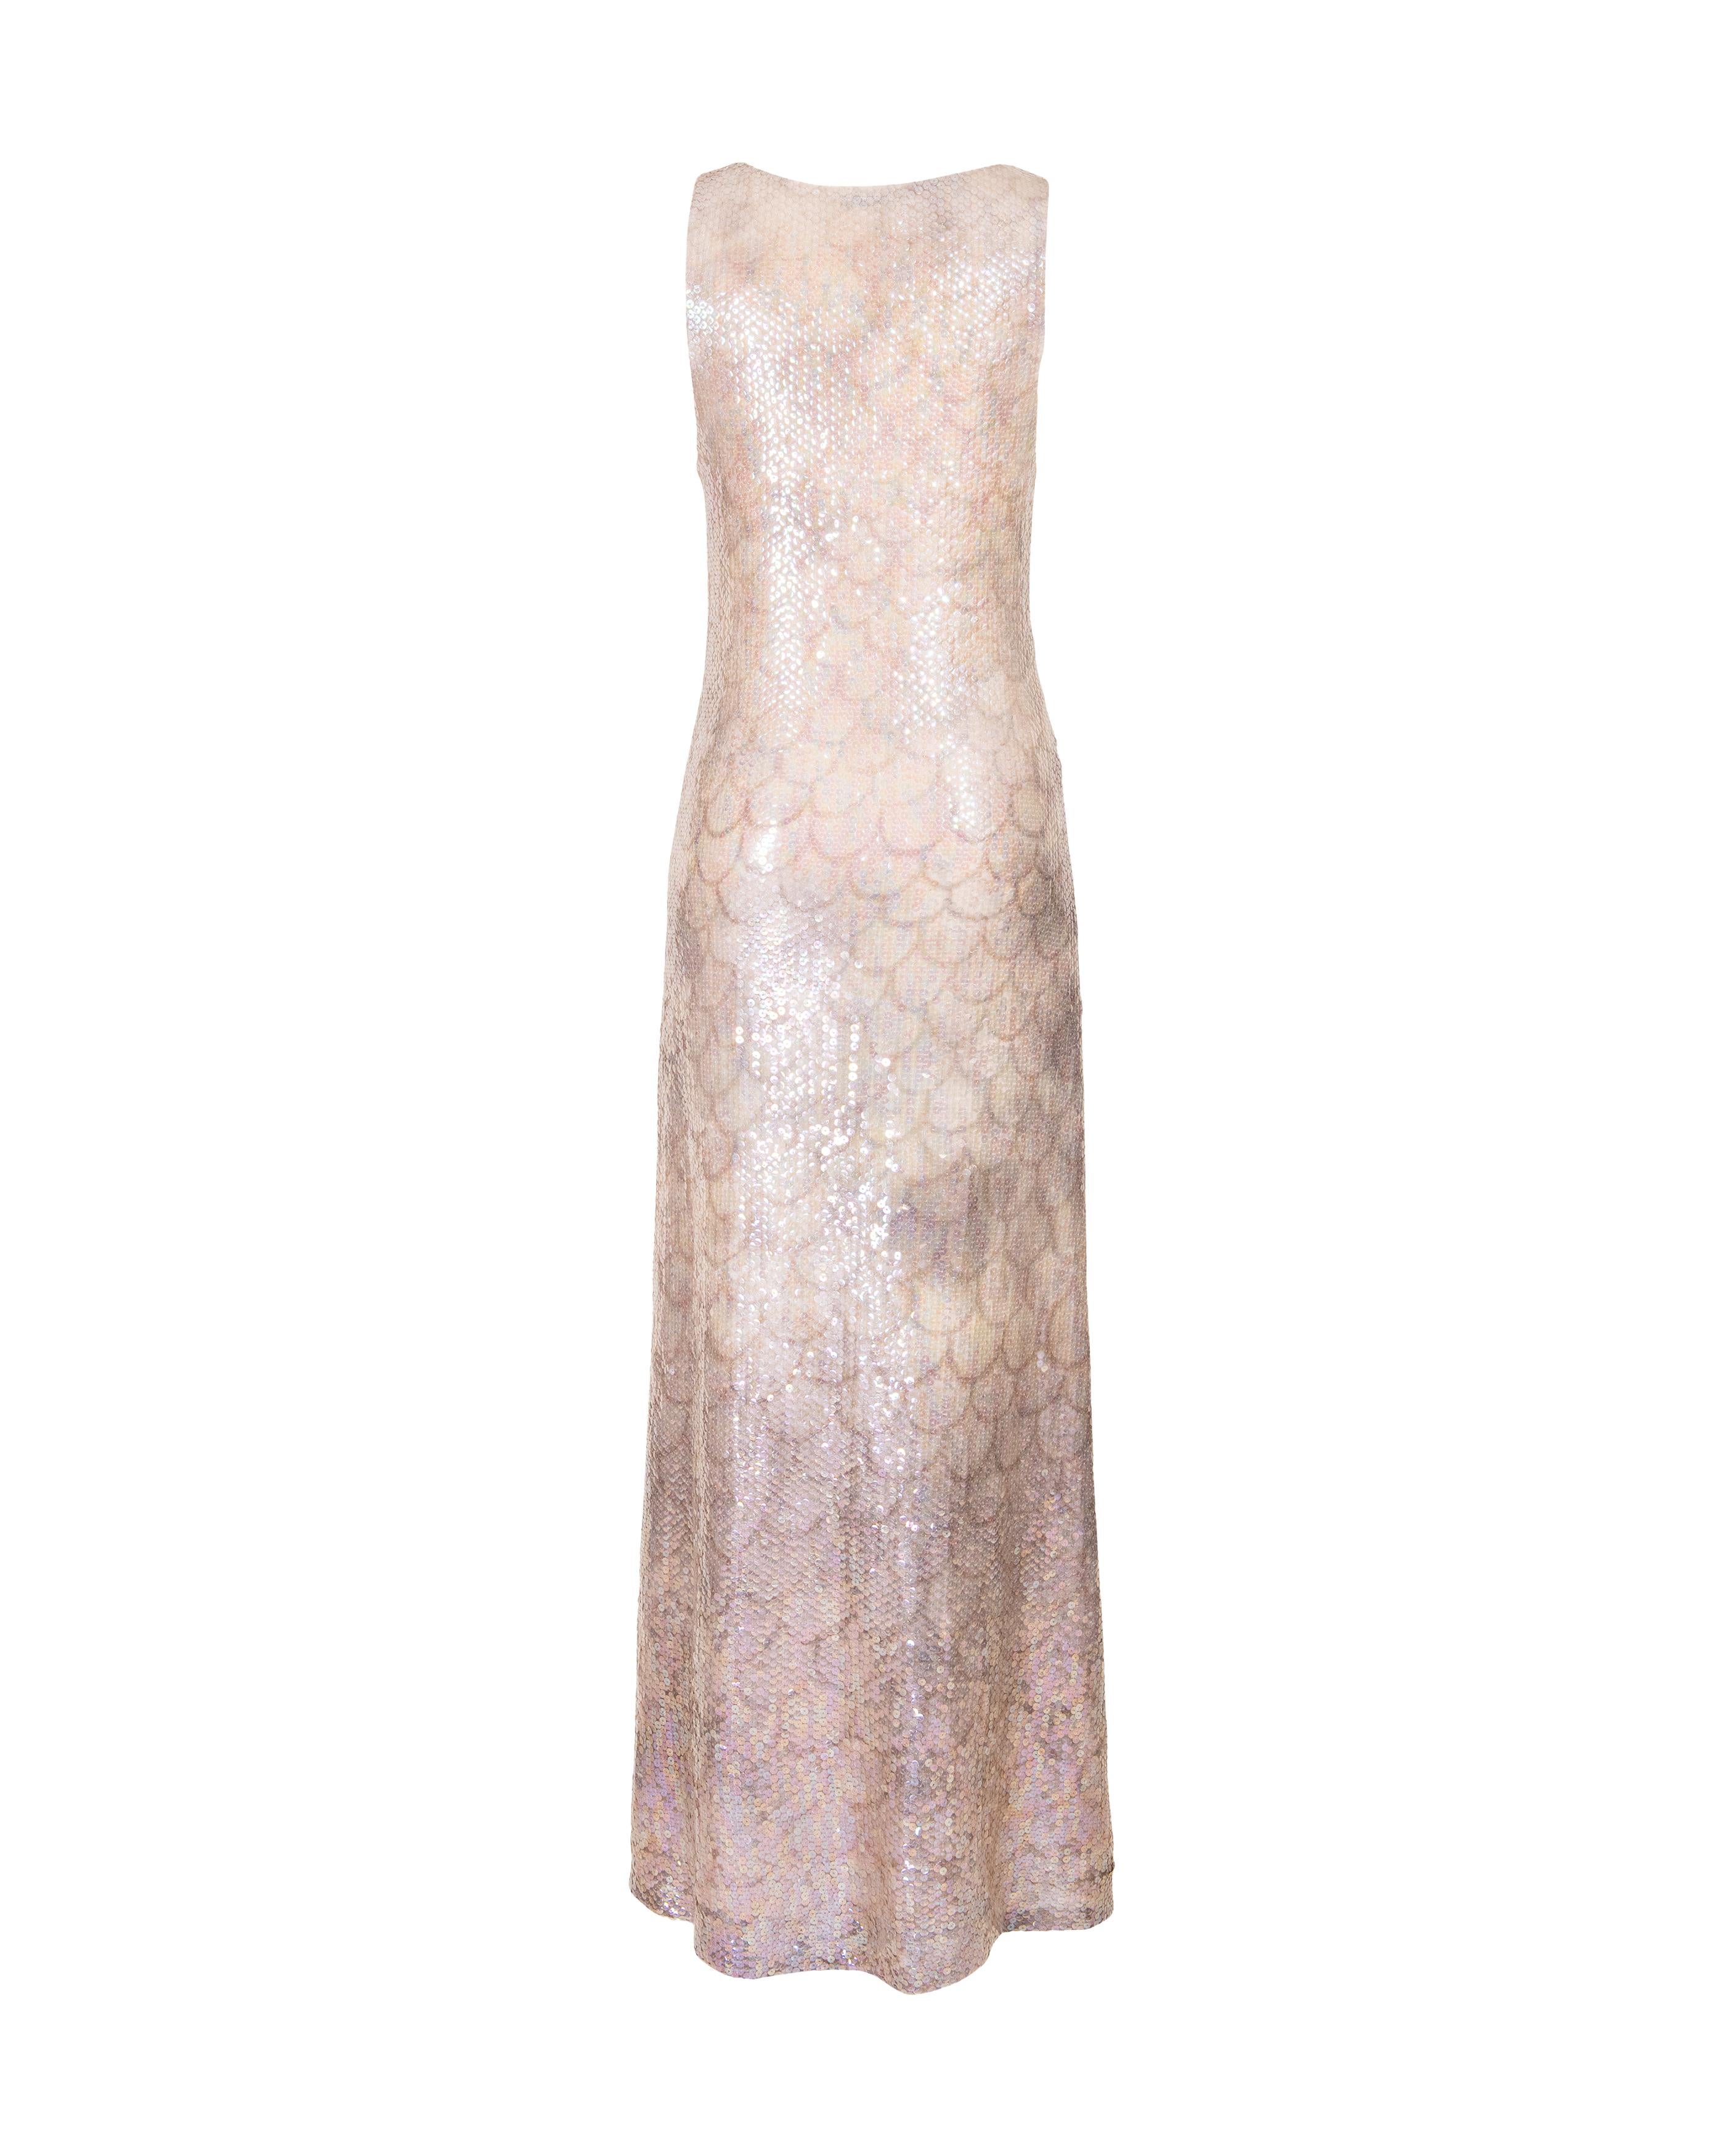 A/W 1973 Halston Sleeveless Sequin 'Scale' Gradient Gown 1